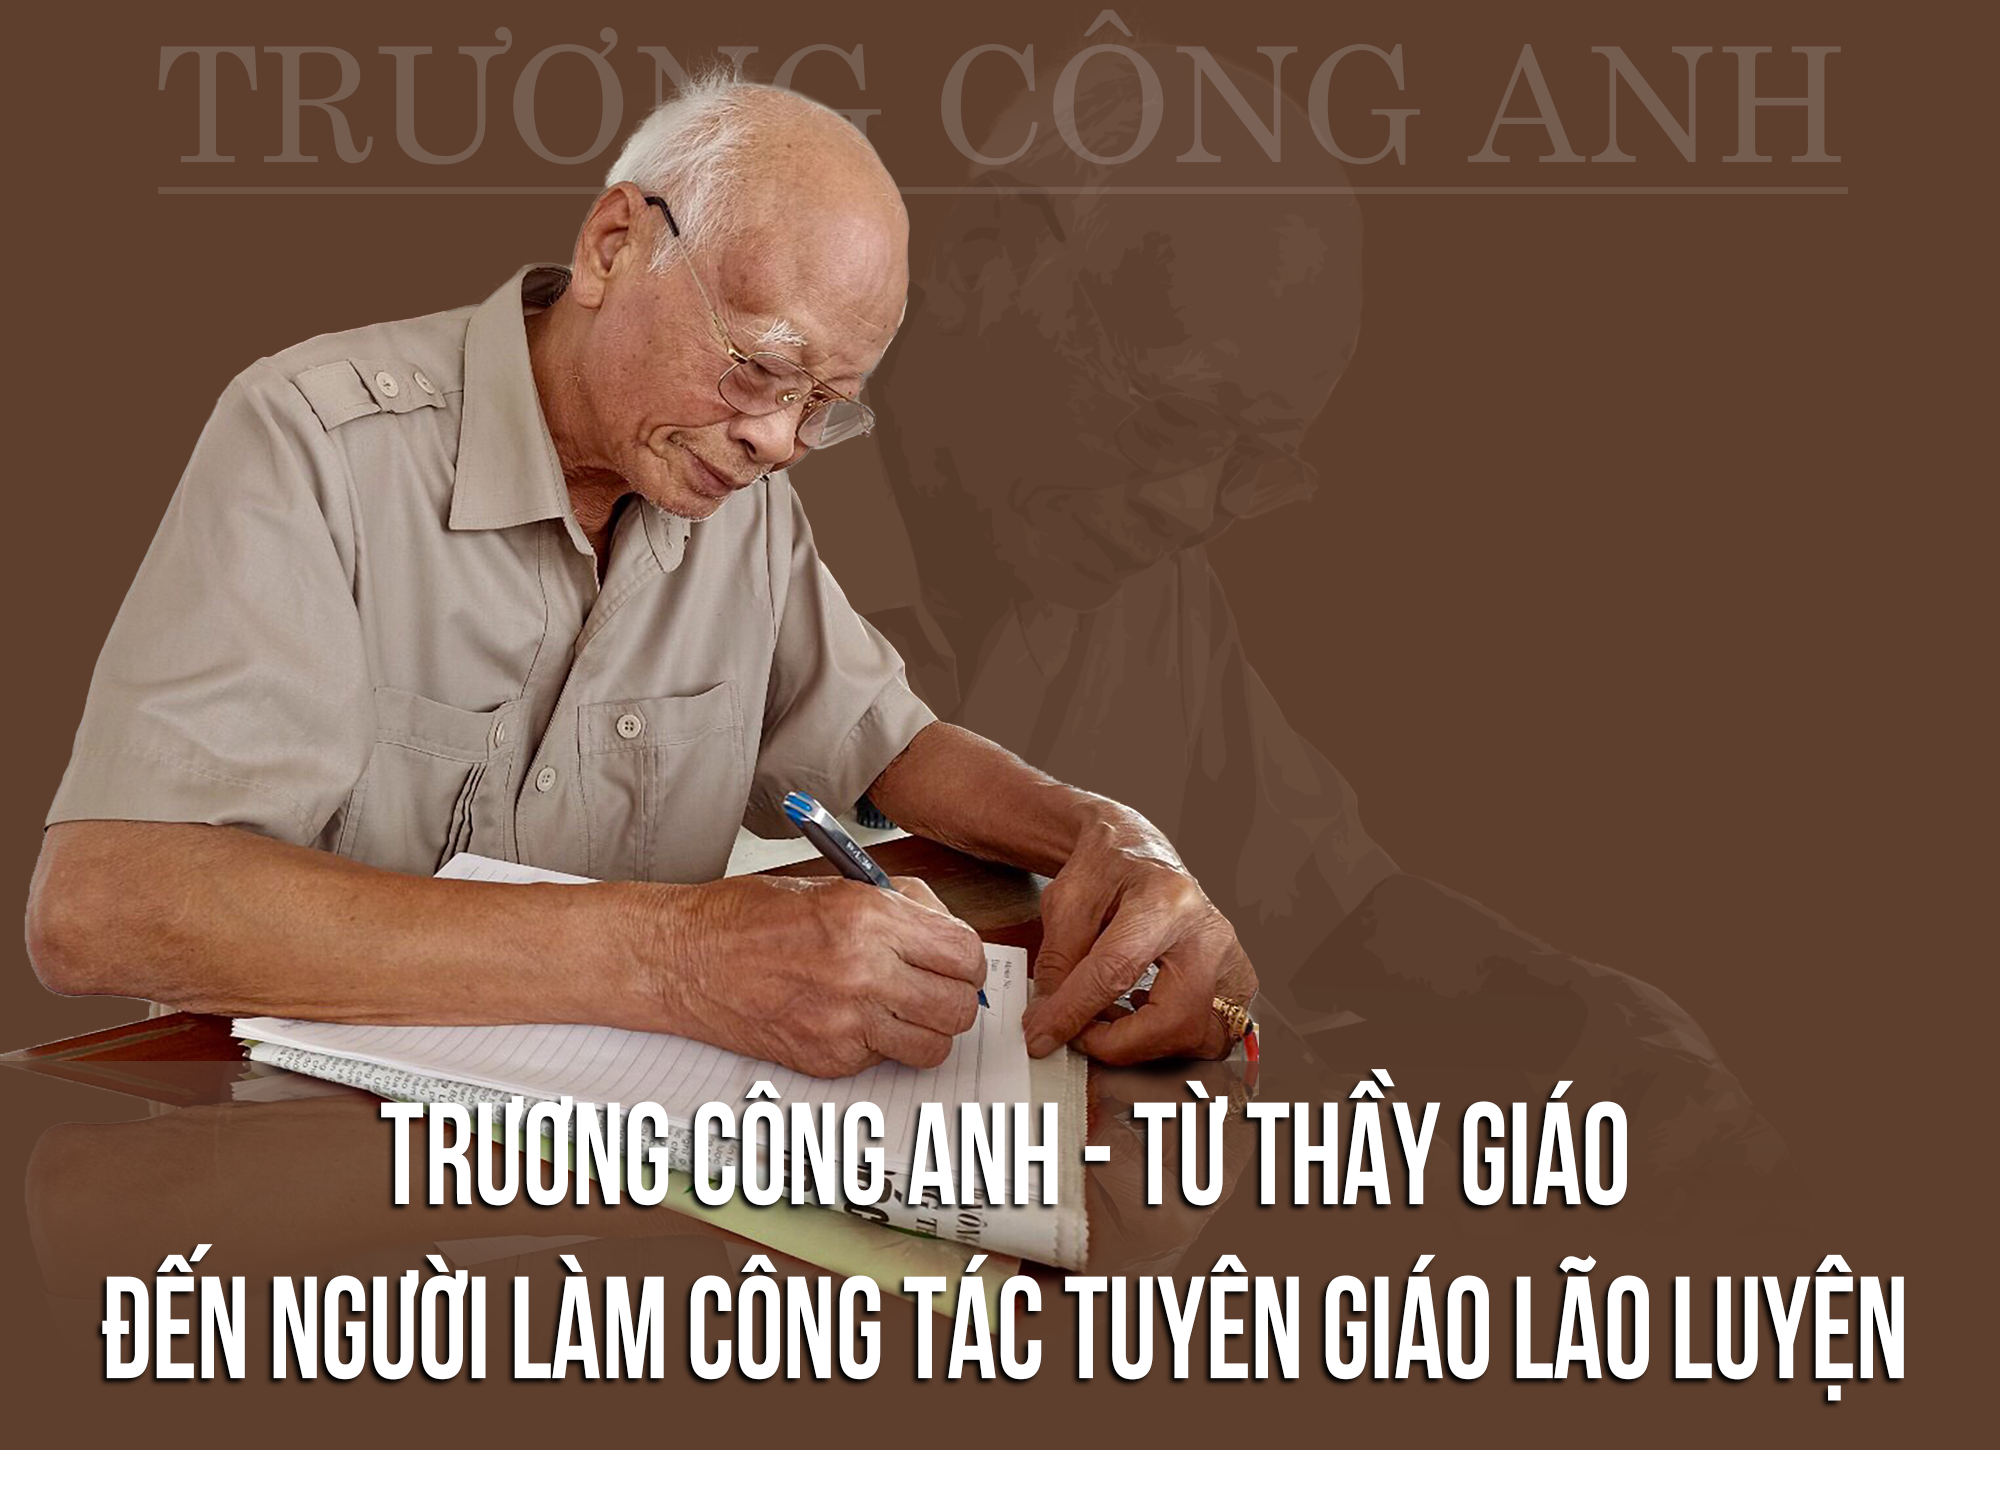 bac-truong-cong-anh-anhtieude.png